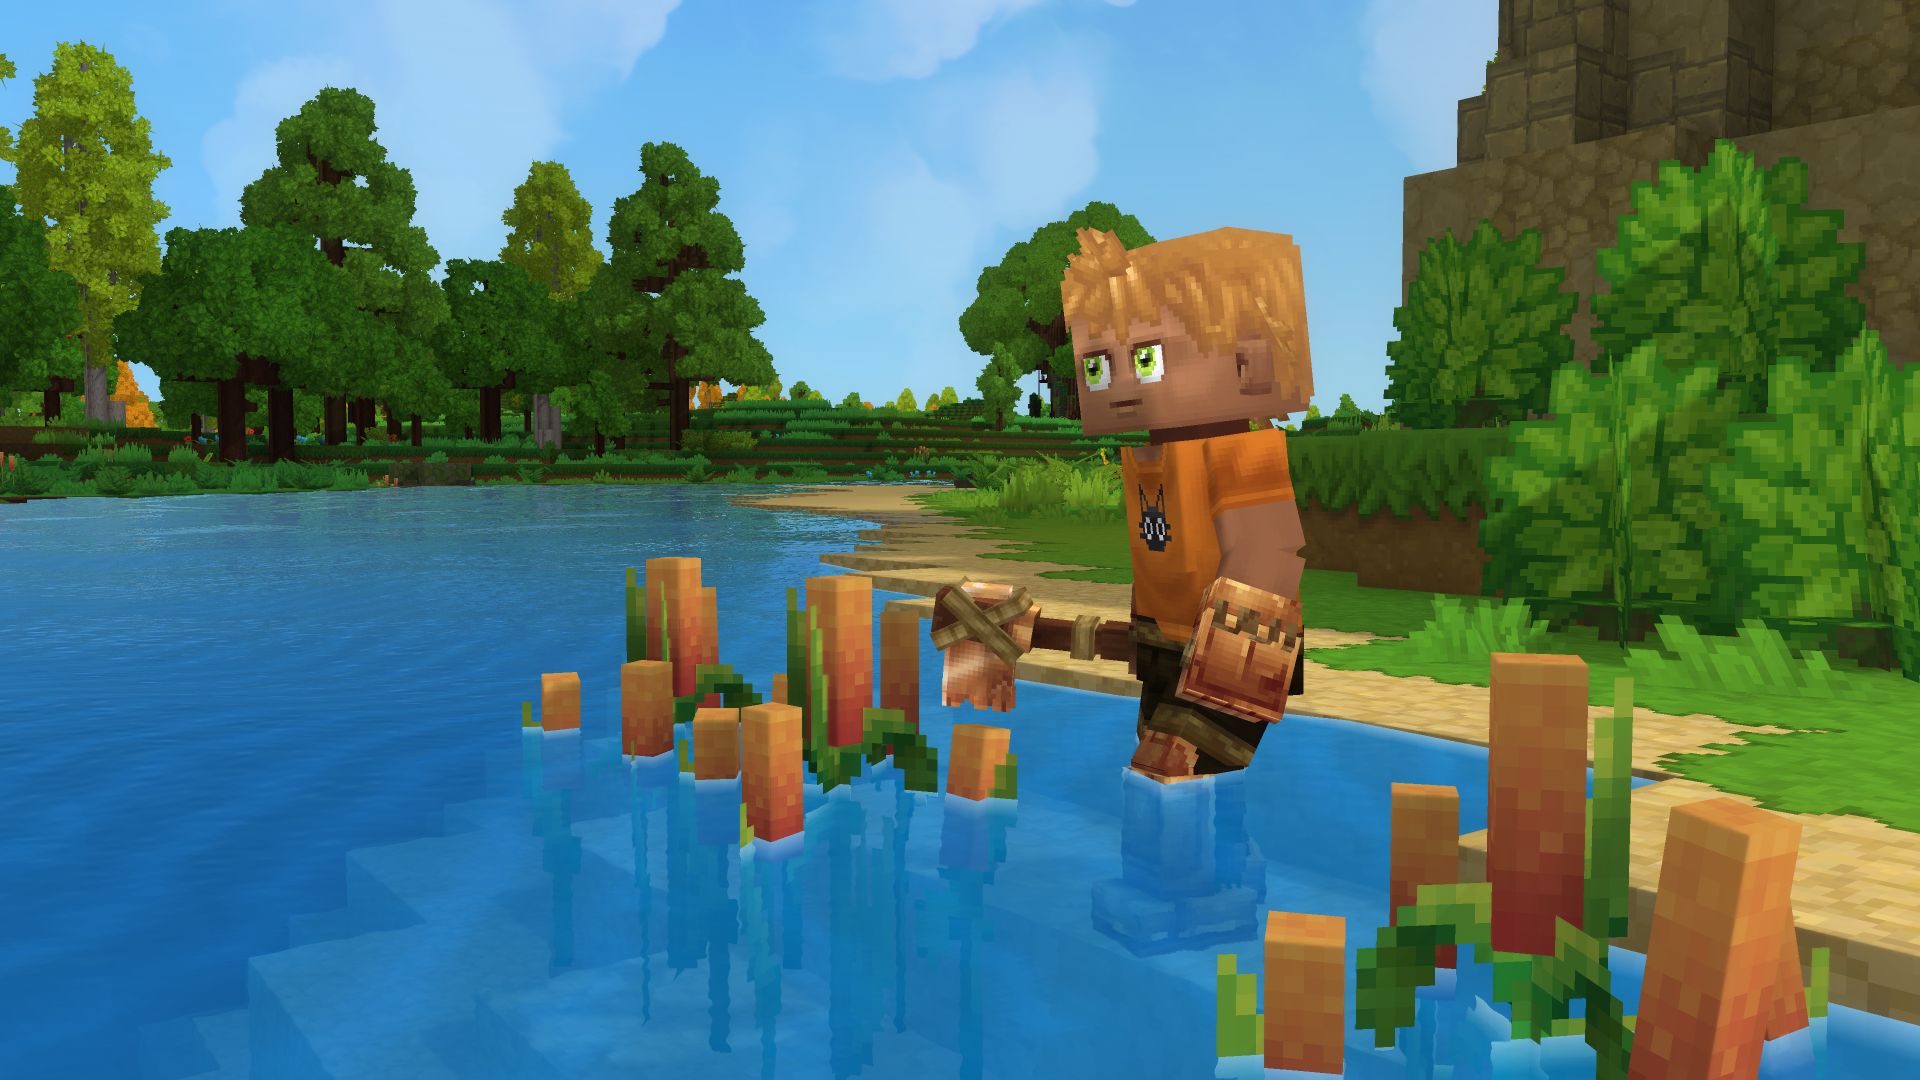 when will the beta for hytale release